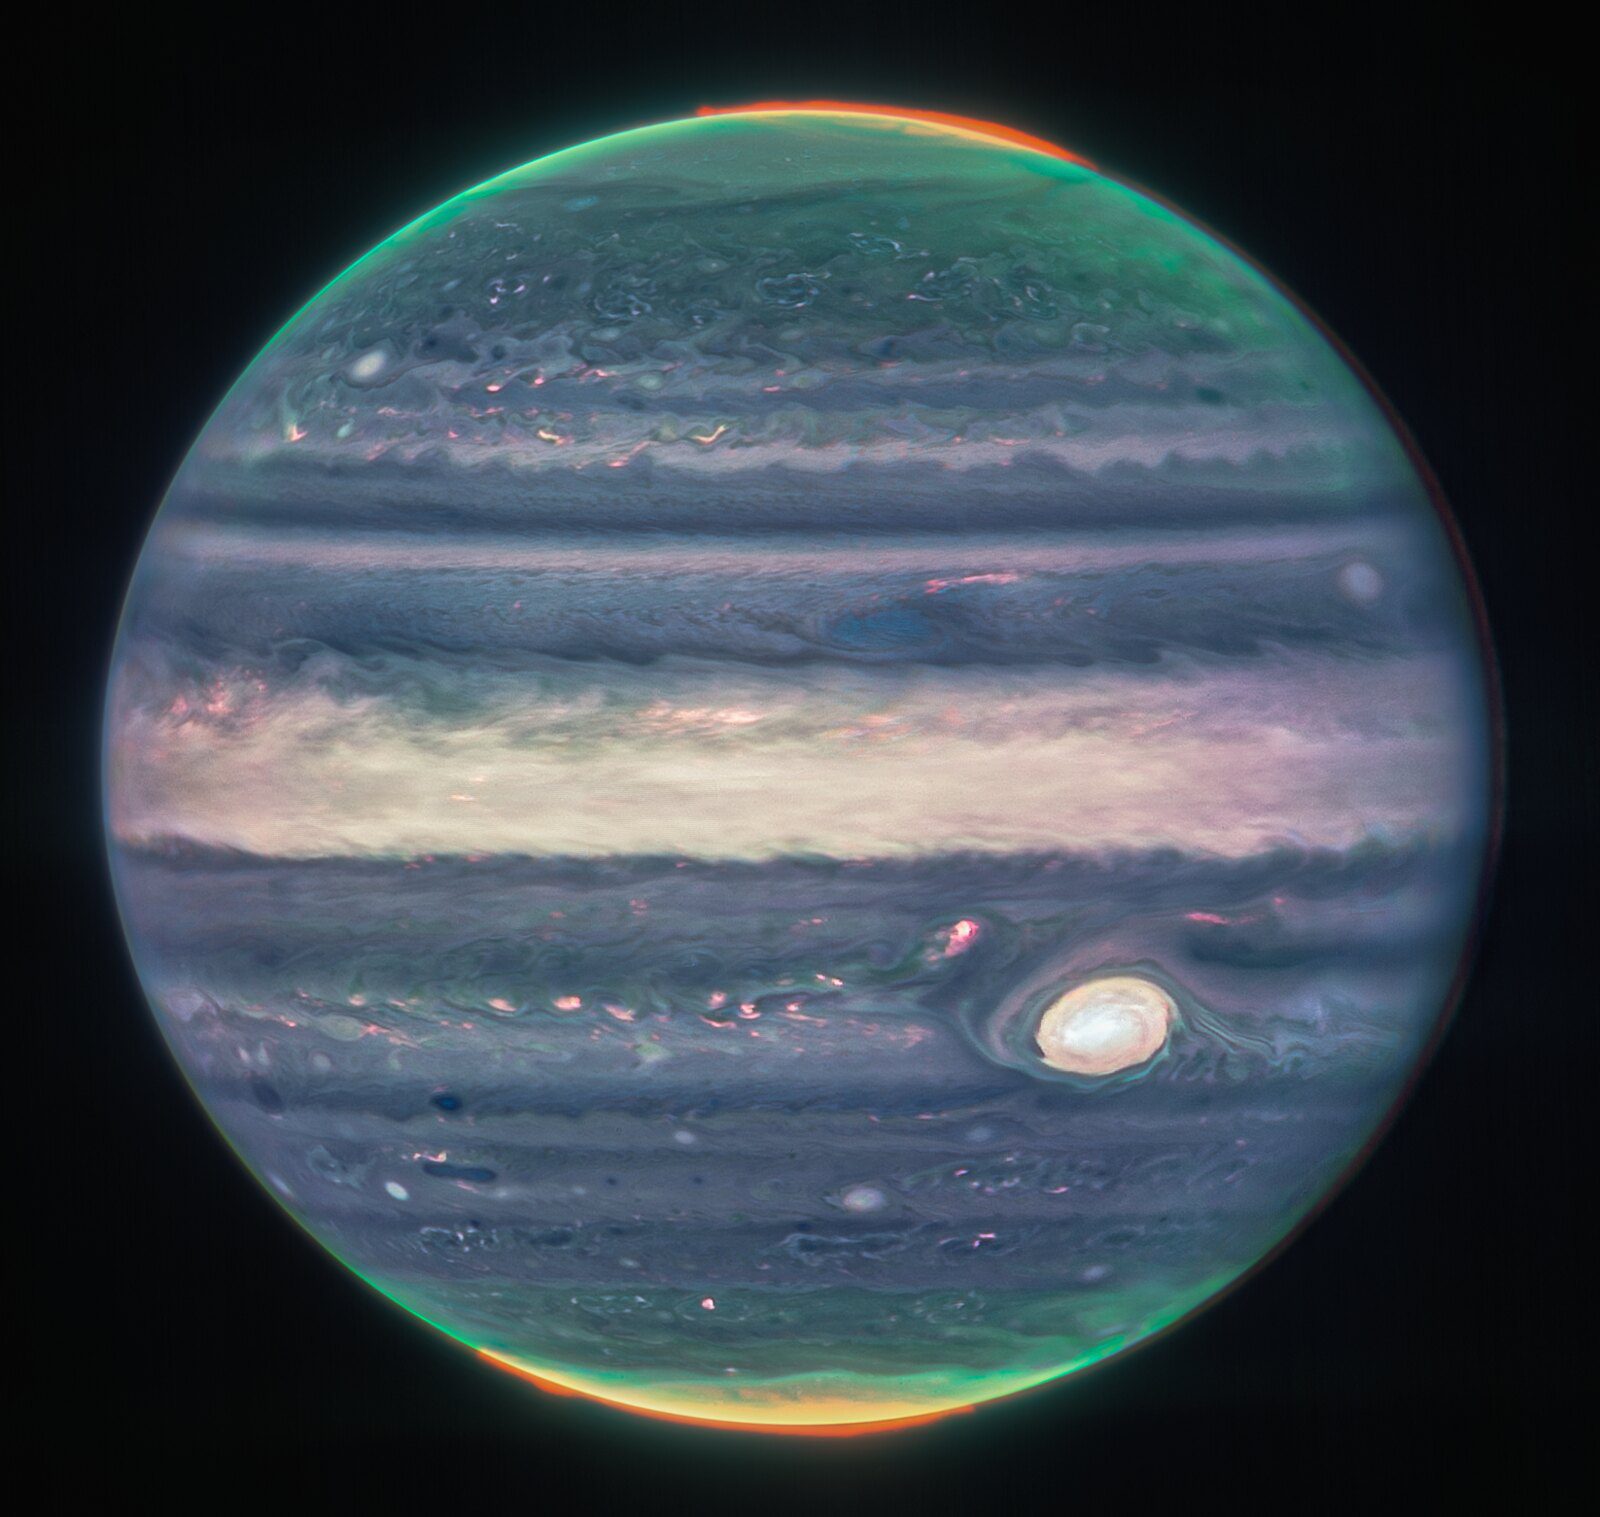 An infrared image of jupiter were differnet portions of the planet's atmosphere and its aurorae are visible